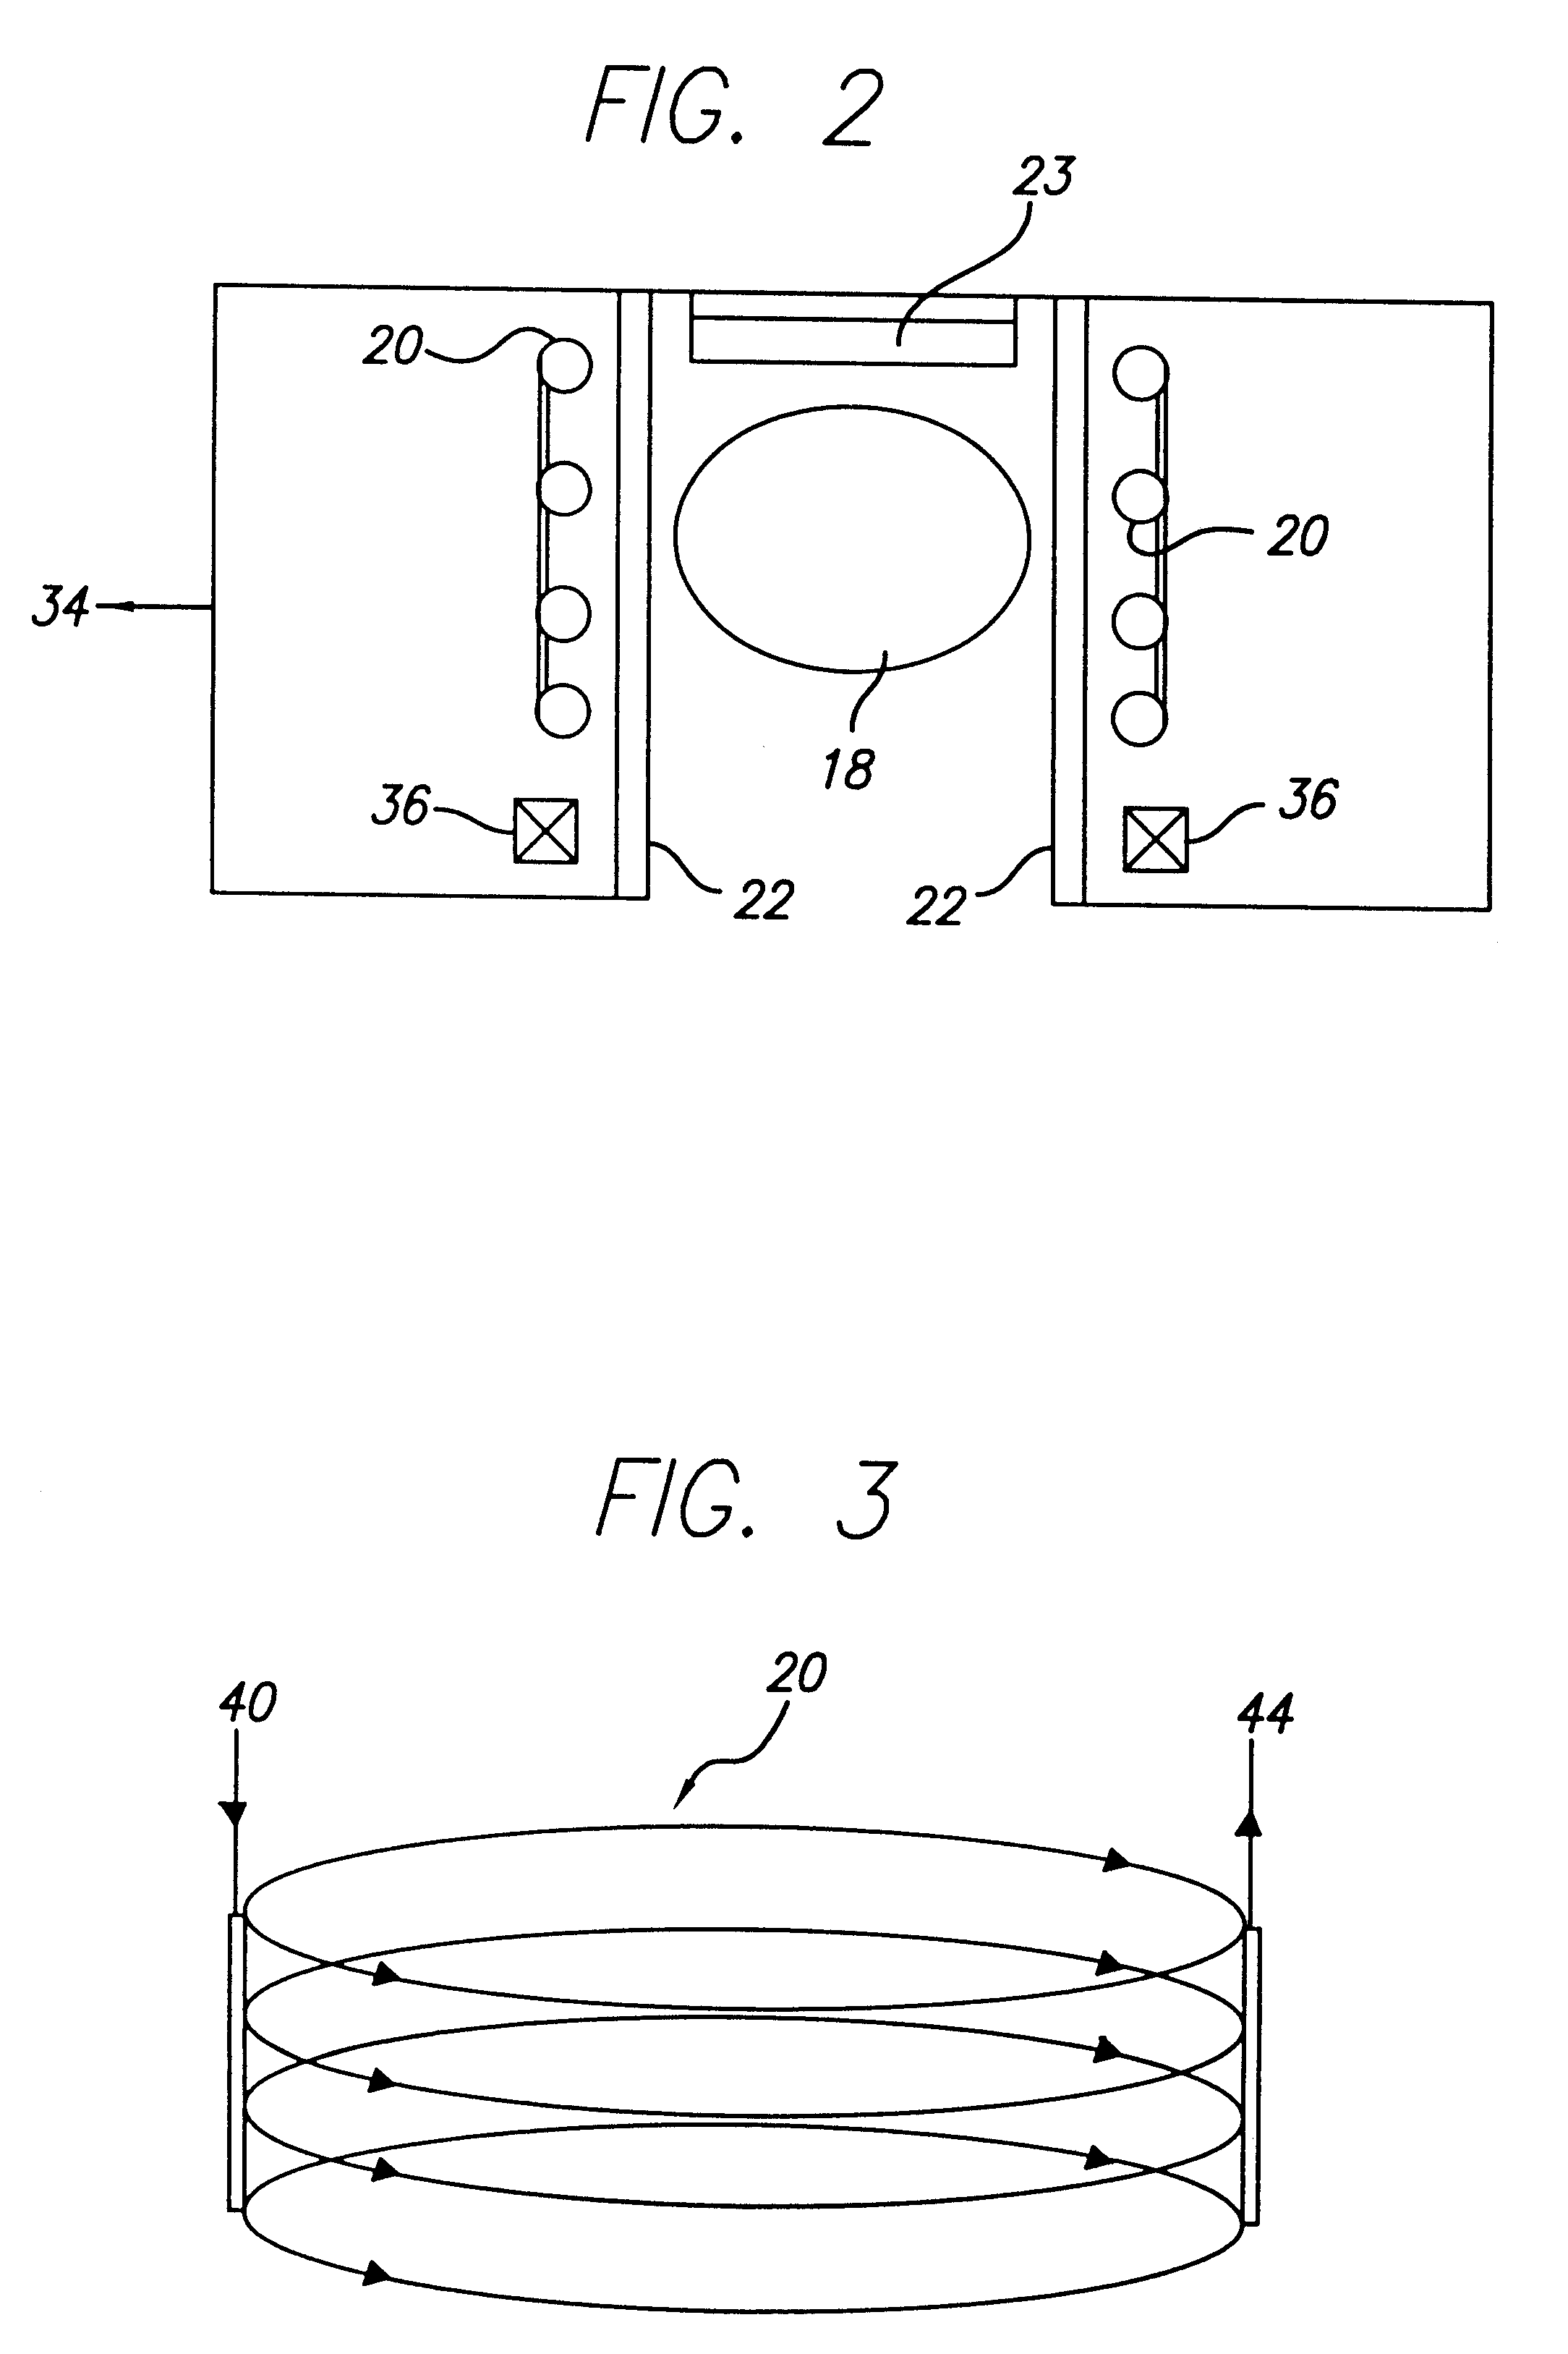 Plasma processing system with a new inductive antenna and hybrid coupling of electronagnetic power